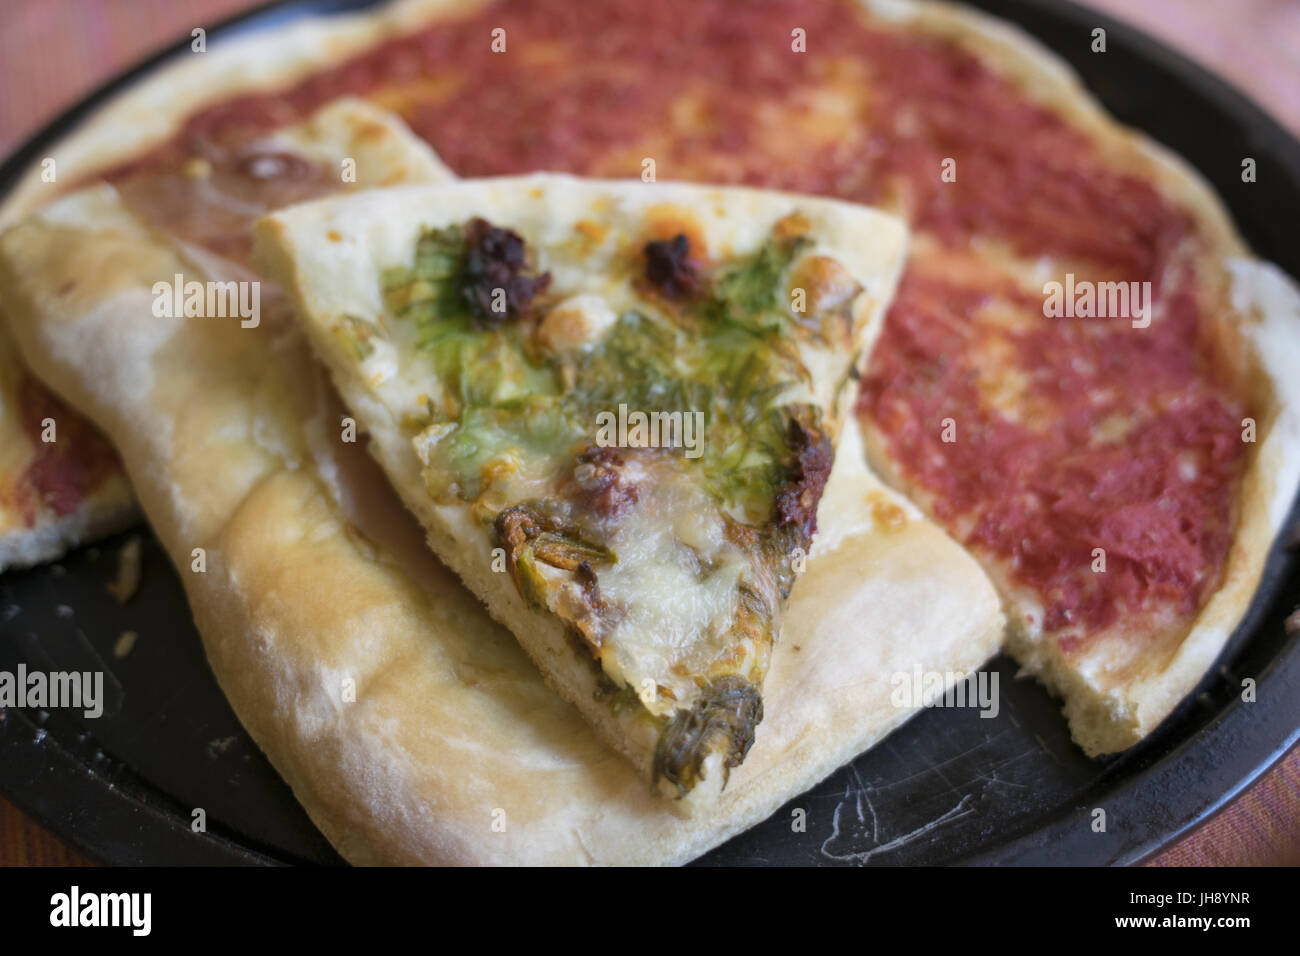 wedge of pizza made by hand with zucchini flowers and achovies Stock Photo